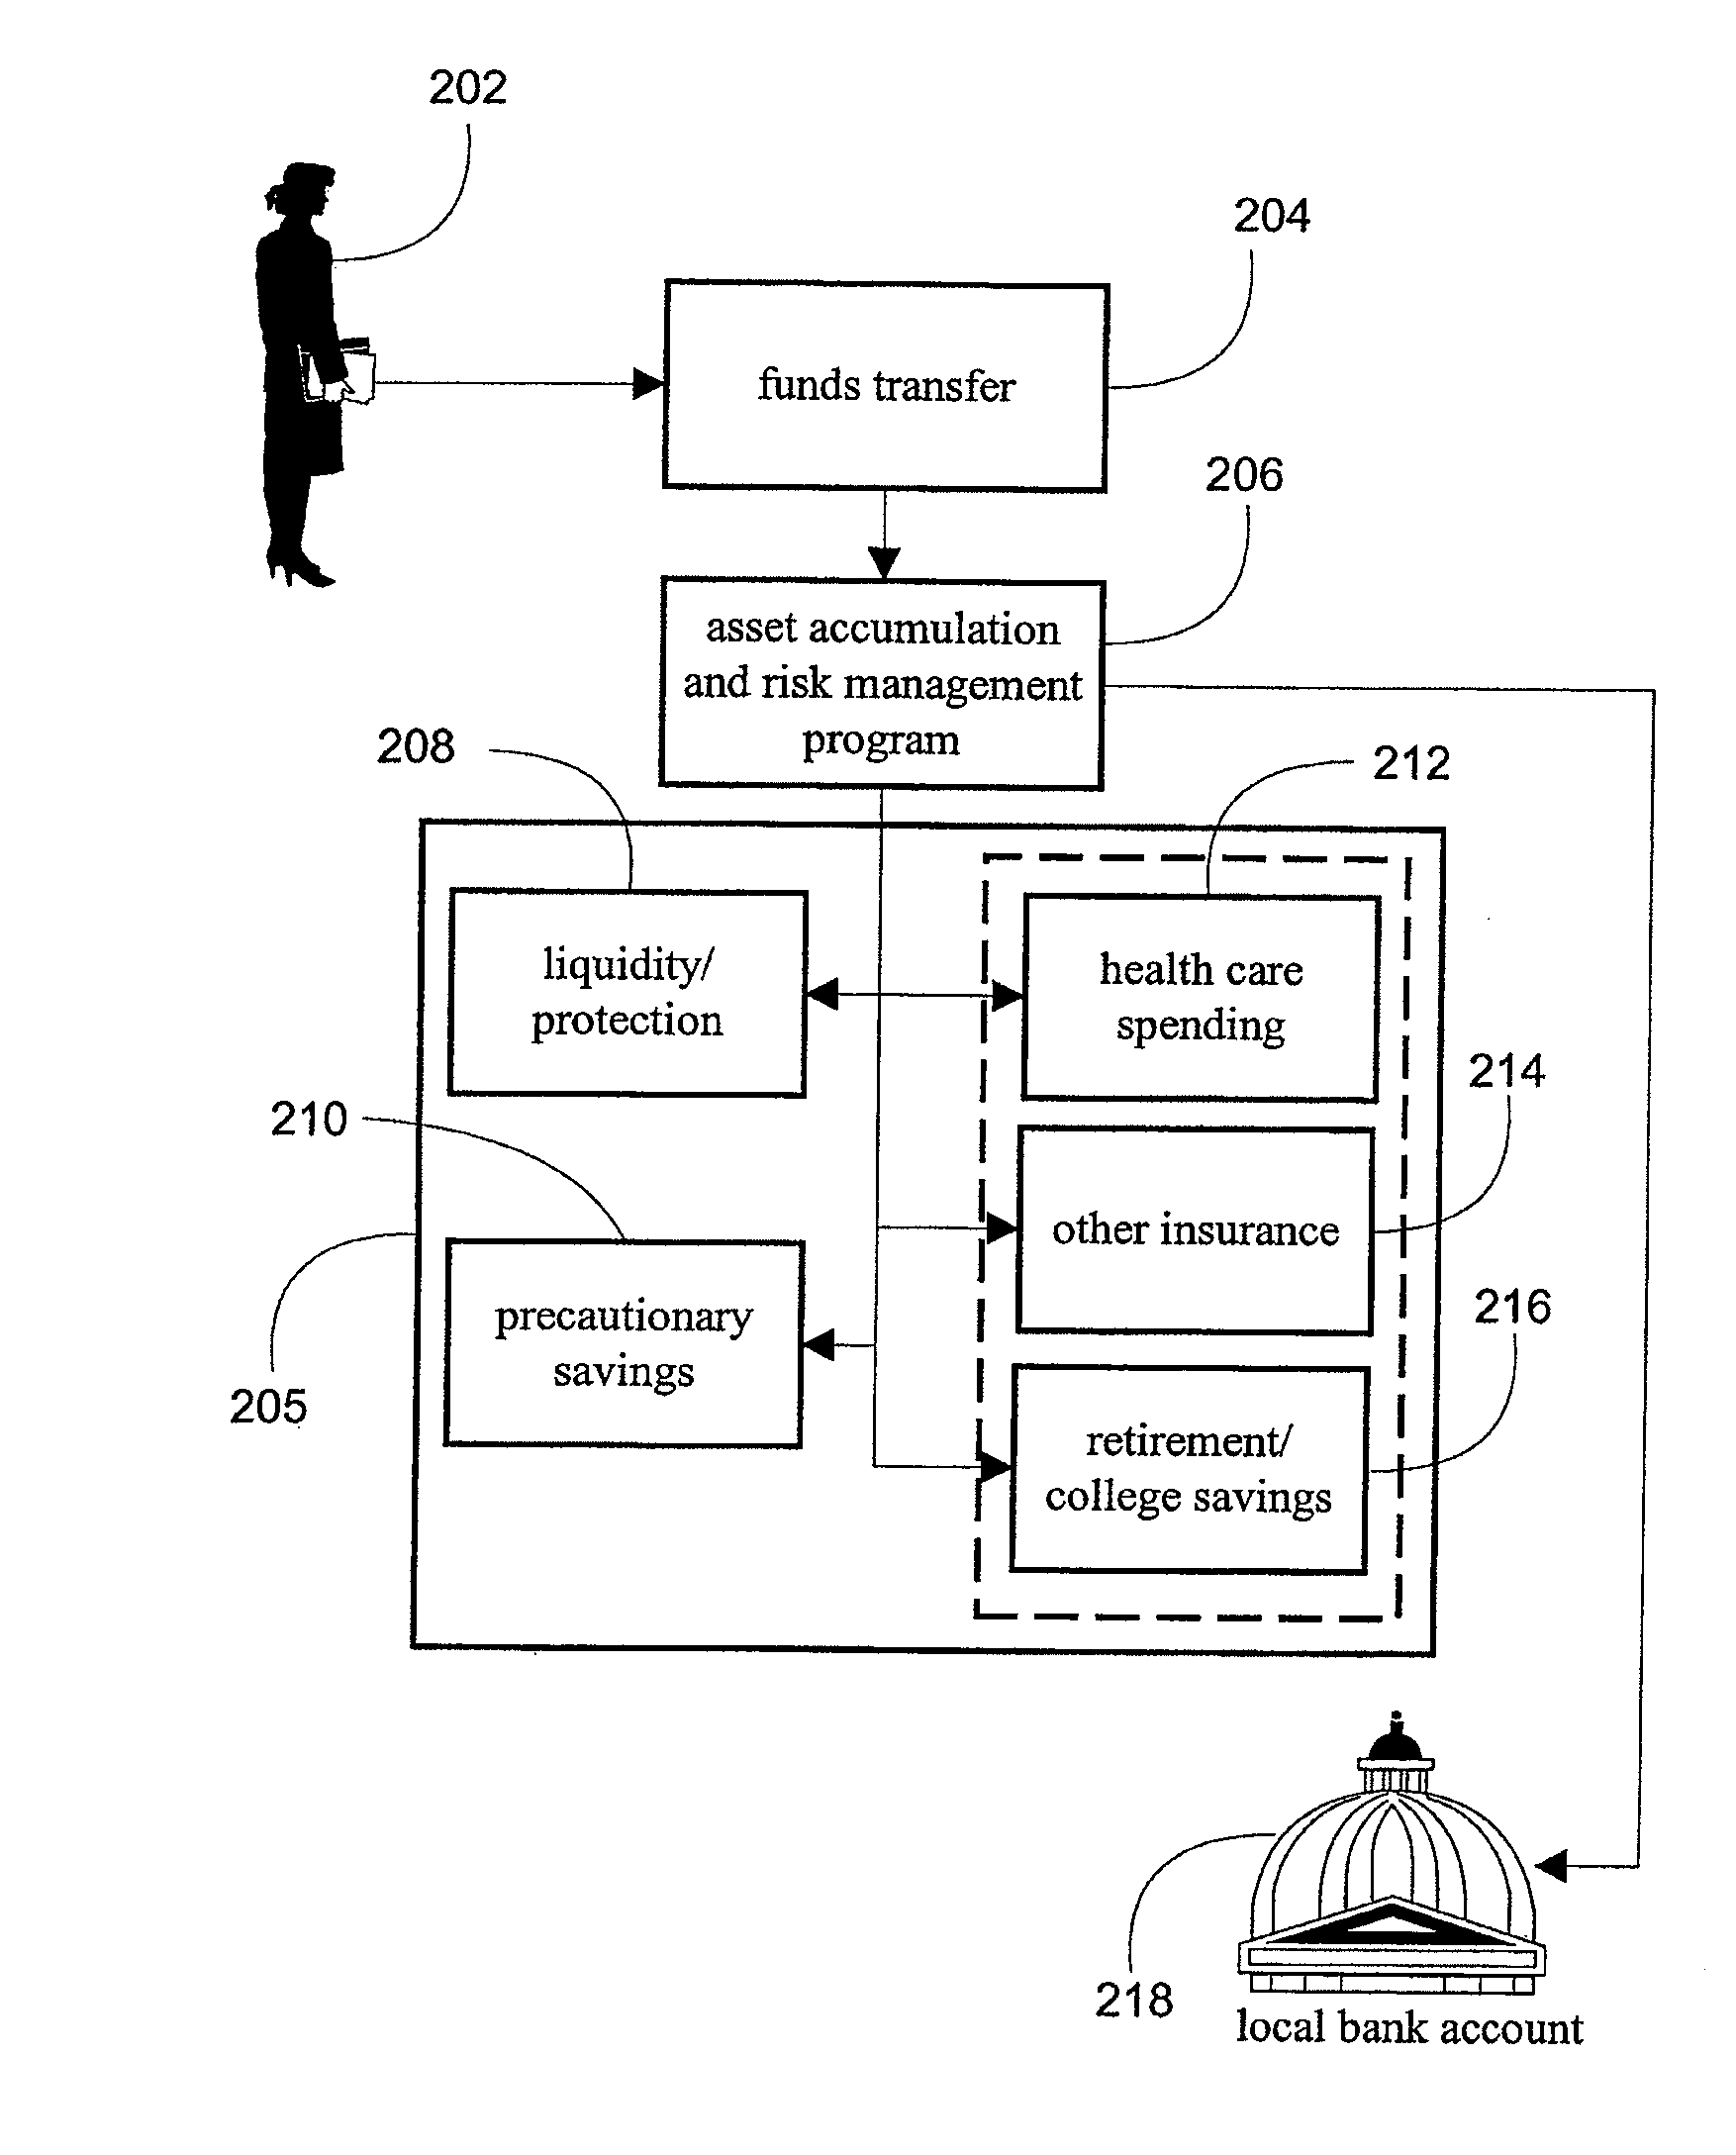 System and Method for Asset Accumulation and Risk Management